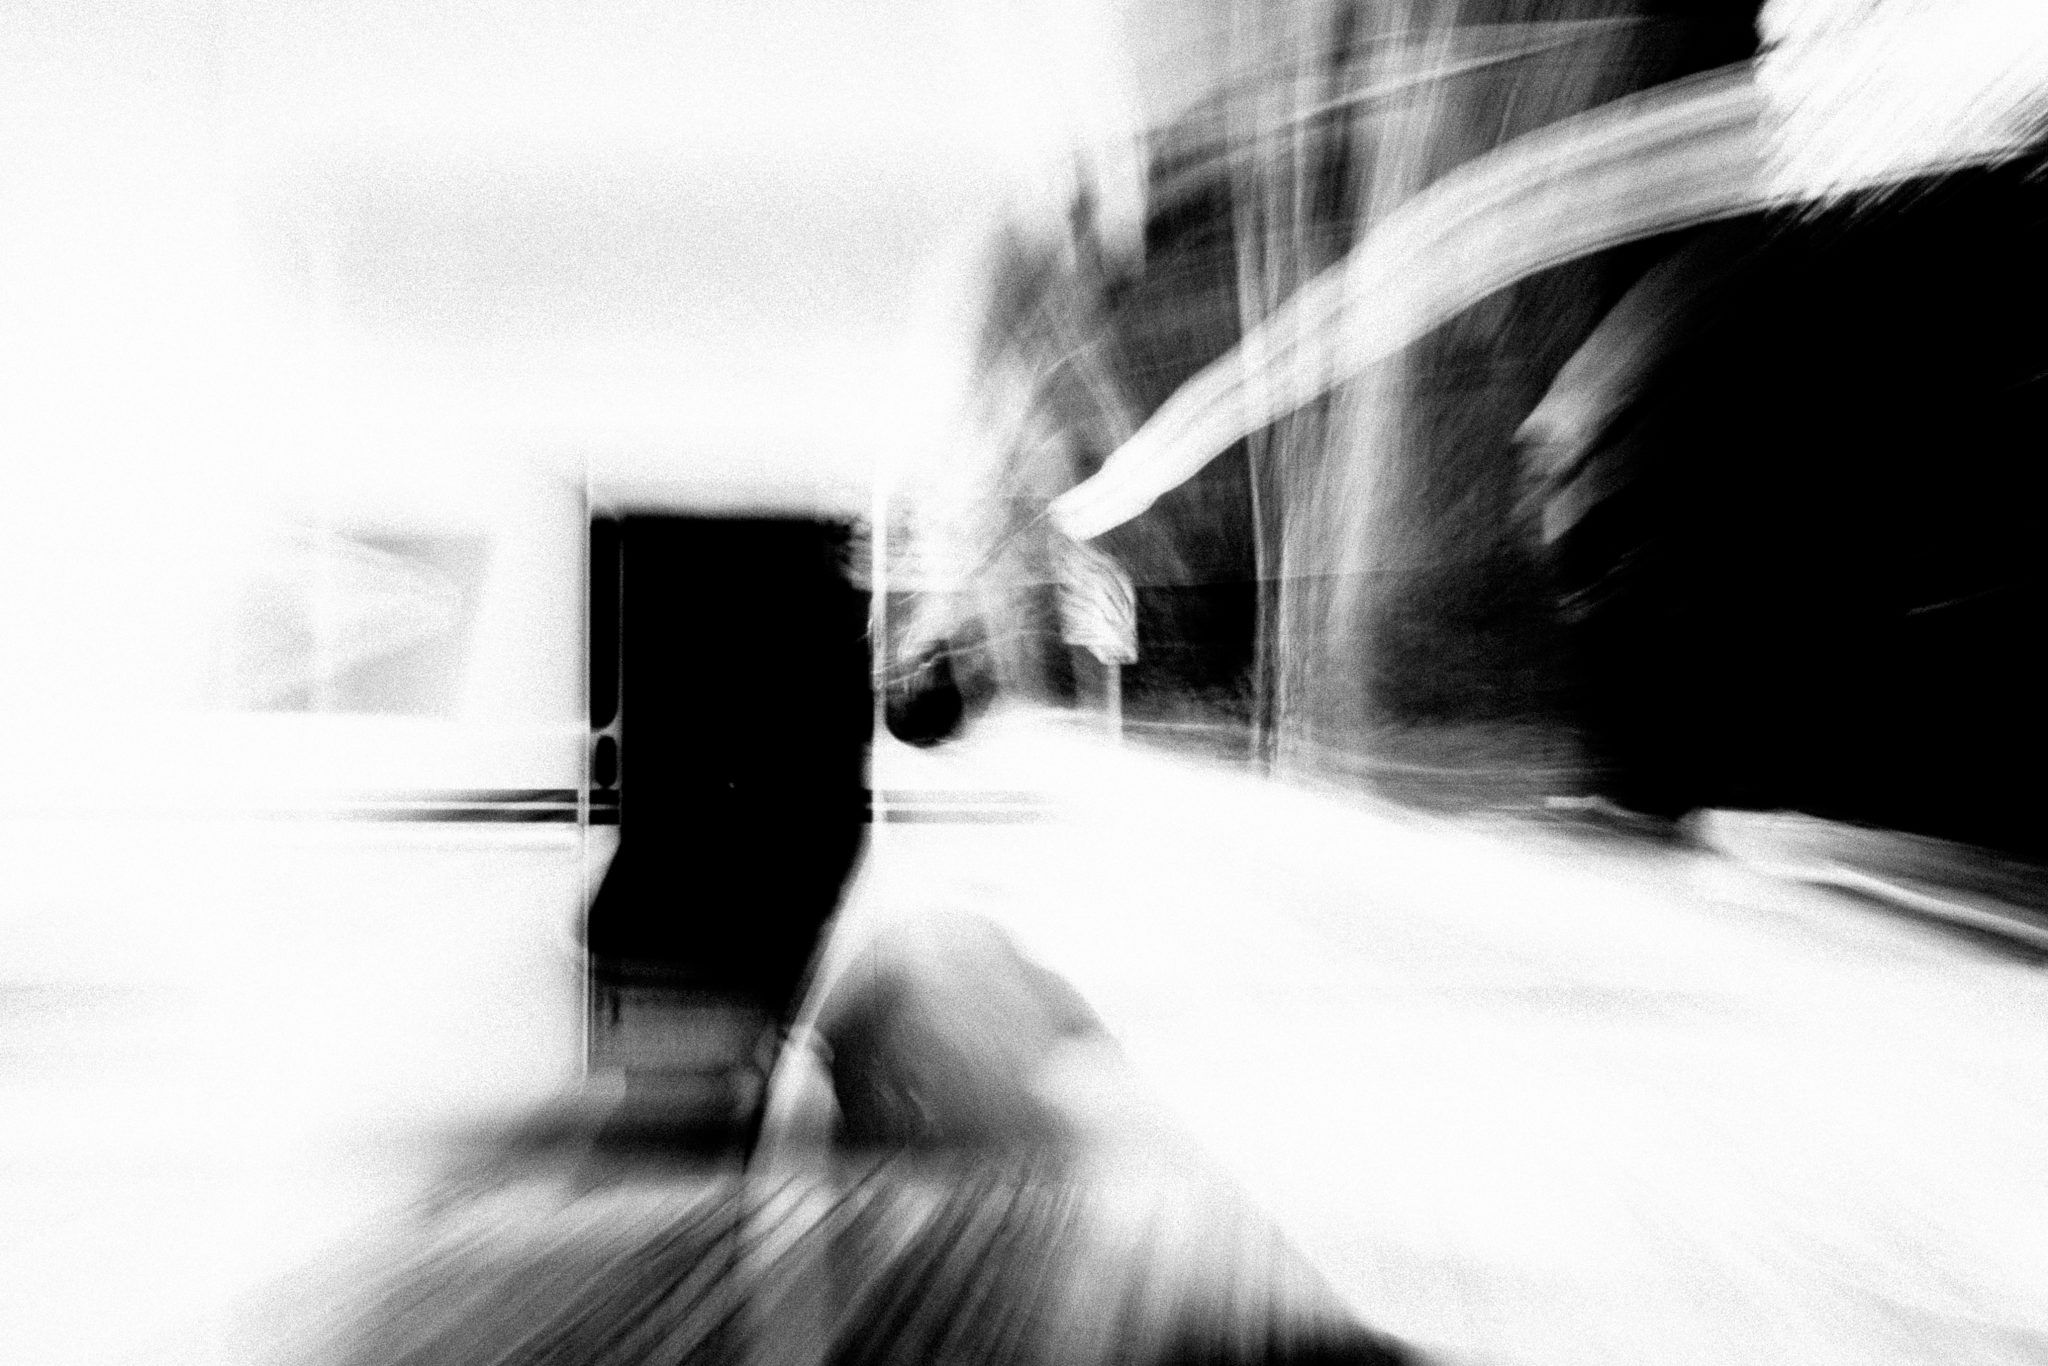 A black and white image shot by Jay Sennett of postal truck with a very blurry vortex achieved by pulling focus.